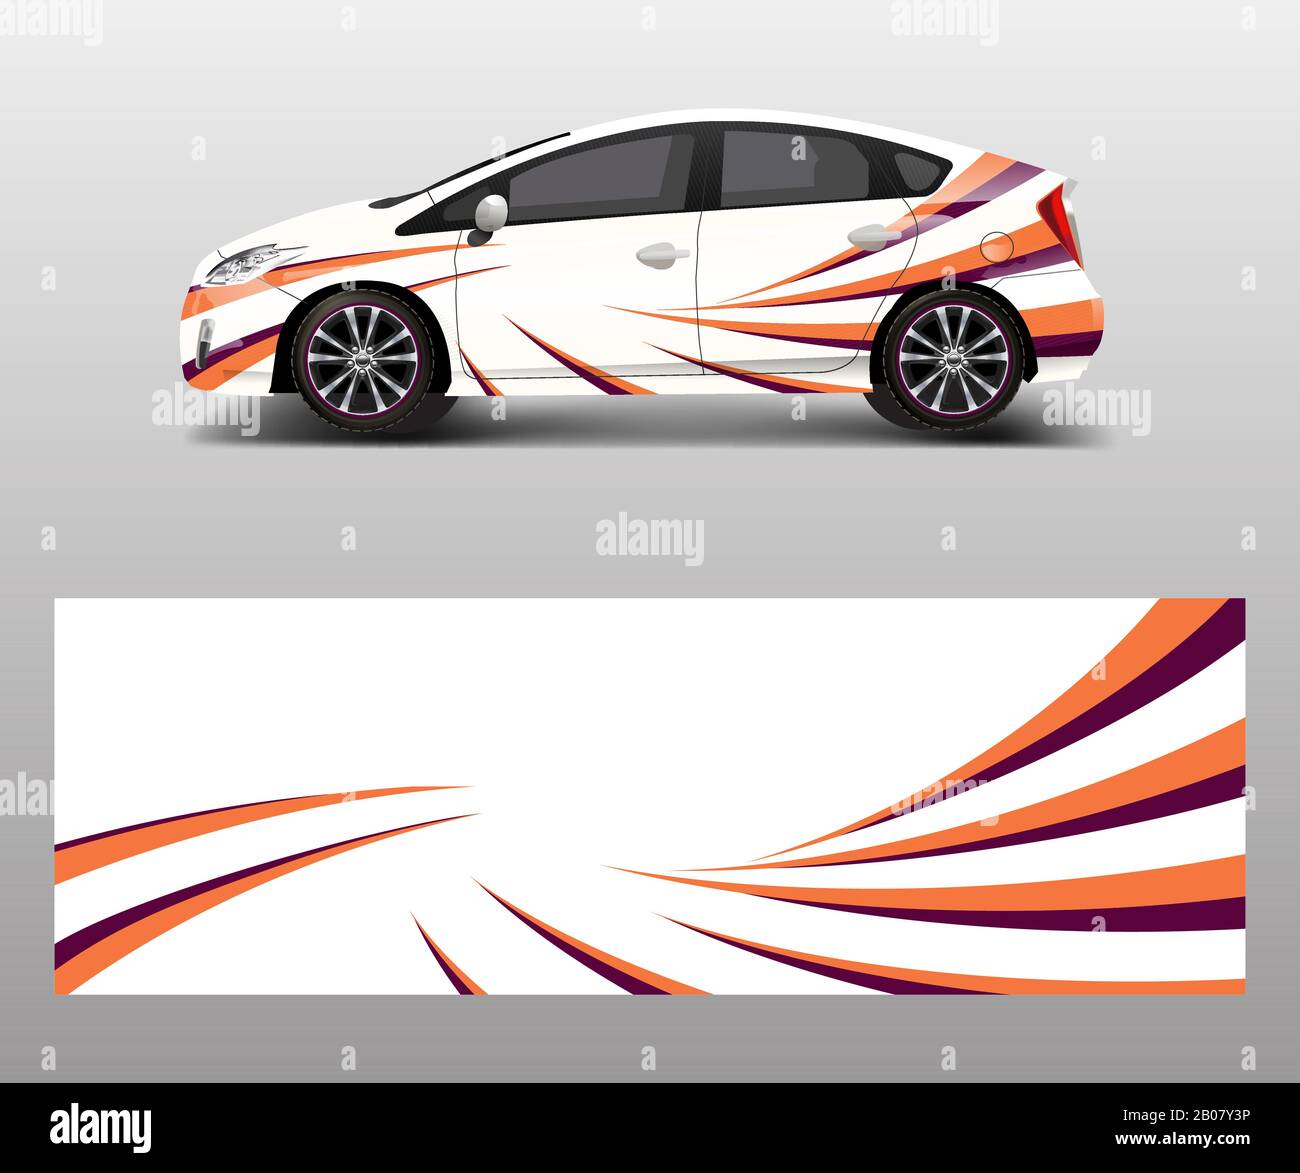 Car decal vector, graphic abstract racing designs for vehicle ...